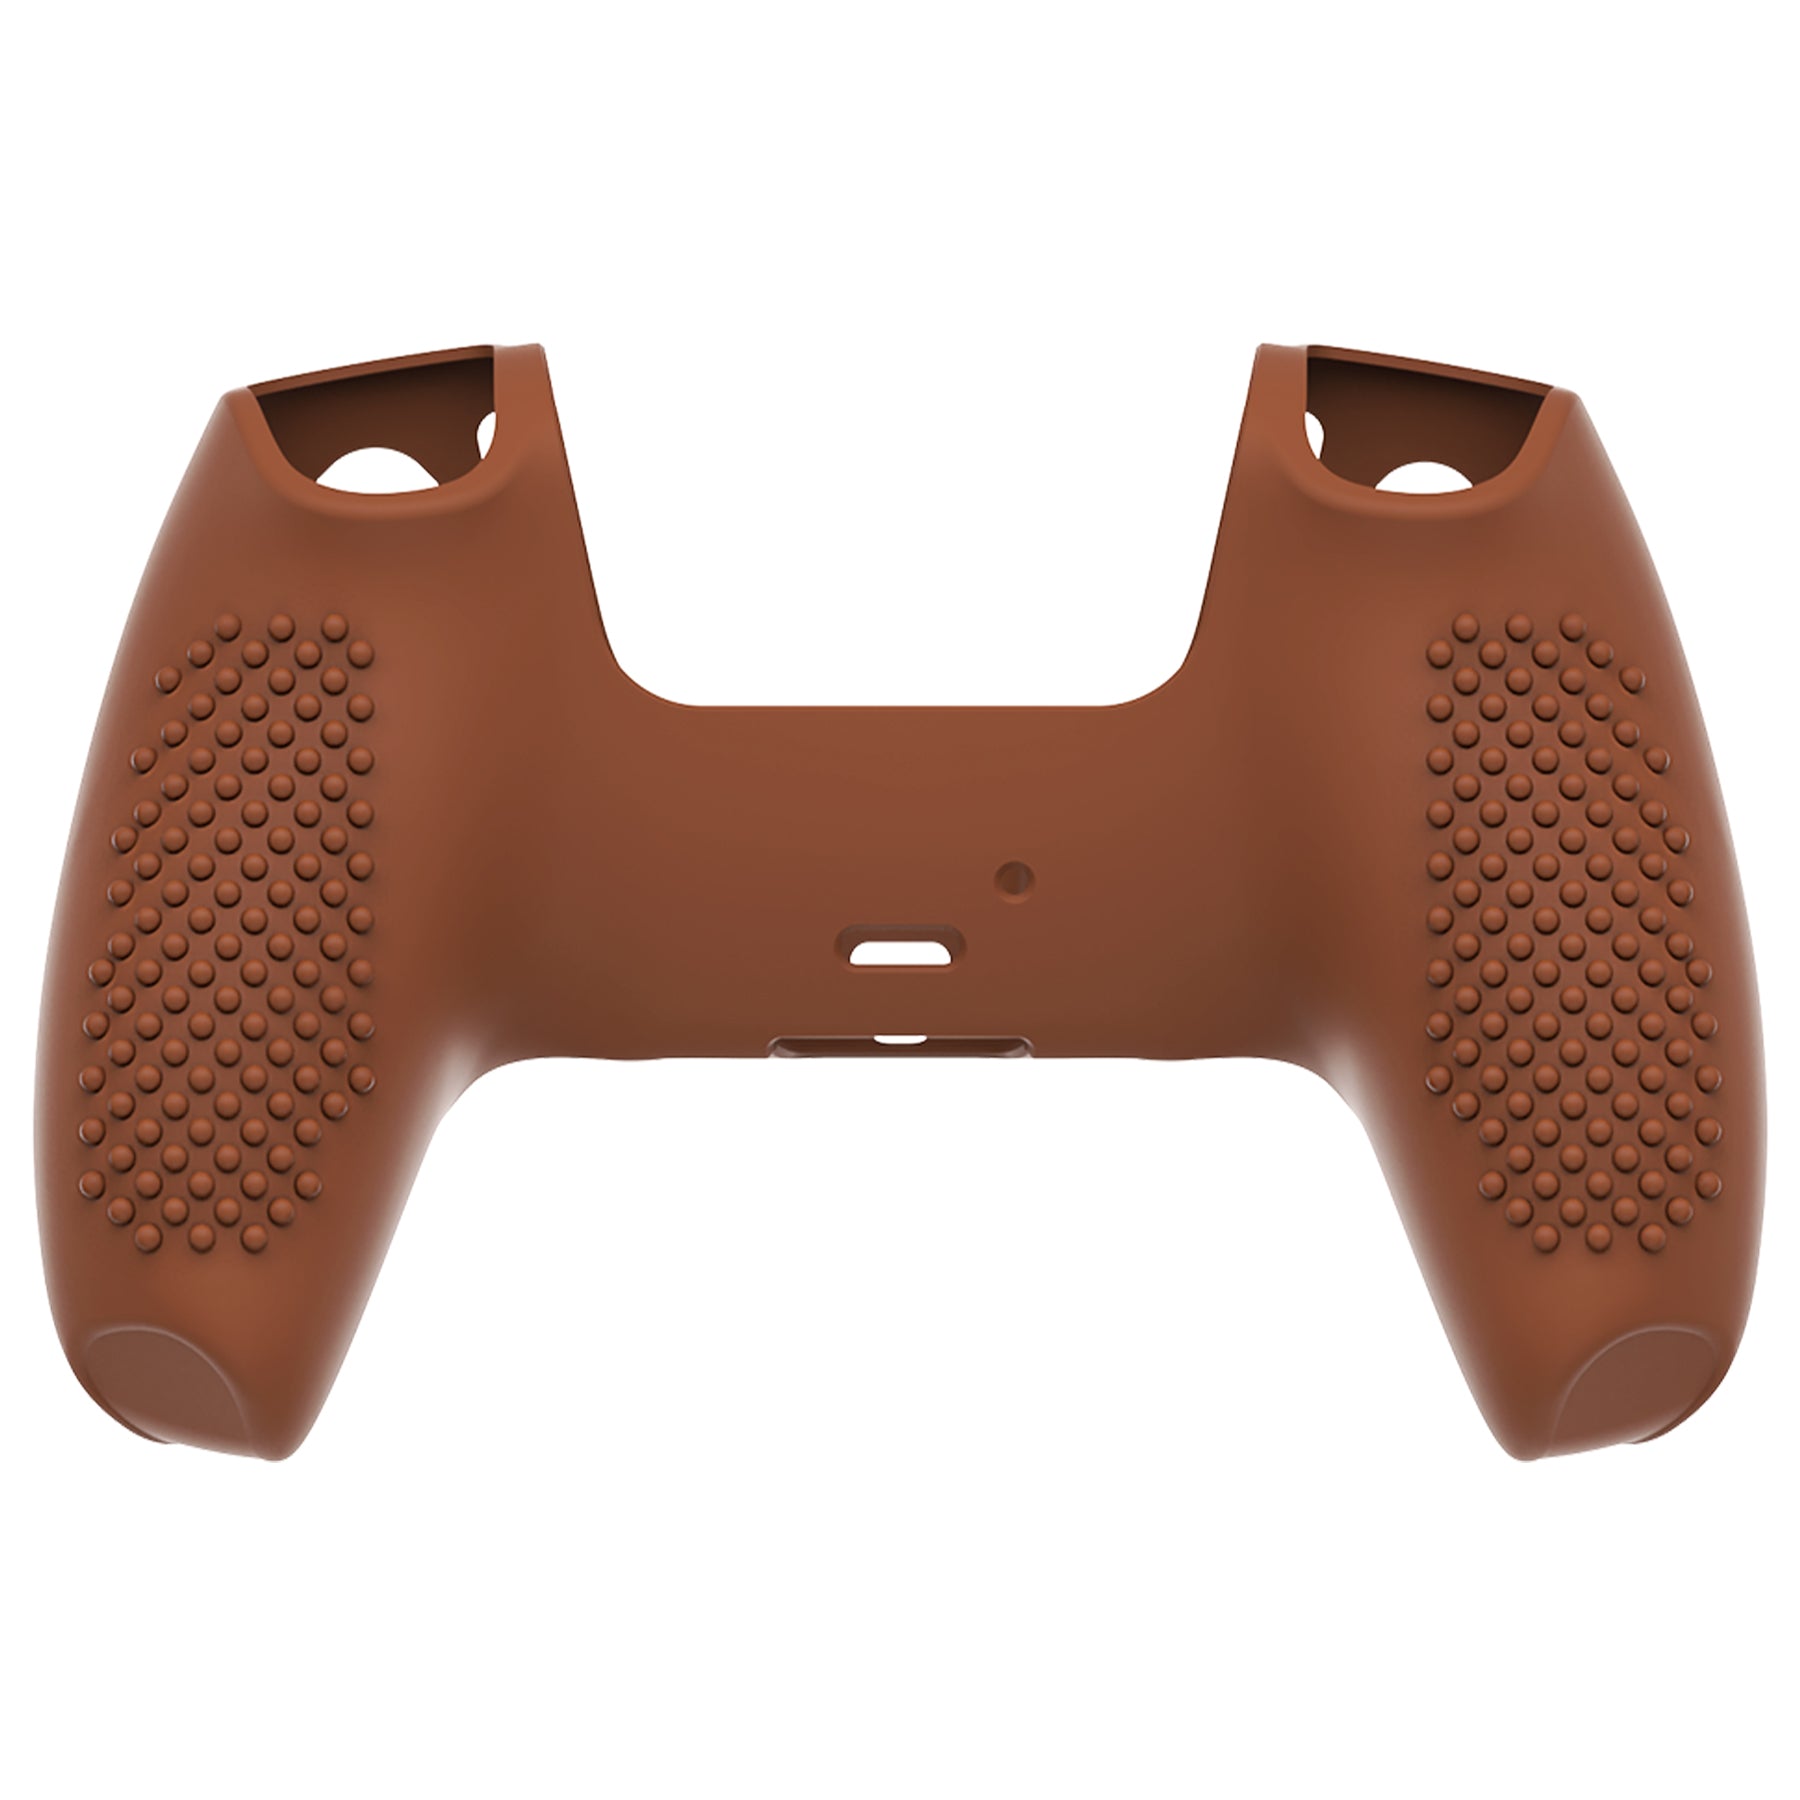 PlayVital 3D Studded Edition Anti-Slip Silicone Cover Skin with Thumb Grip Caps for PS5 Wireless Controller - Signal Brown - TDPF032 PlayVital